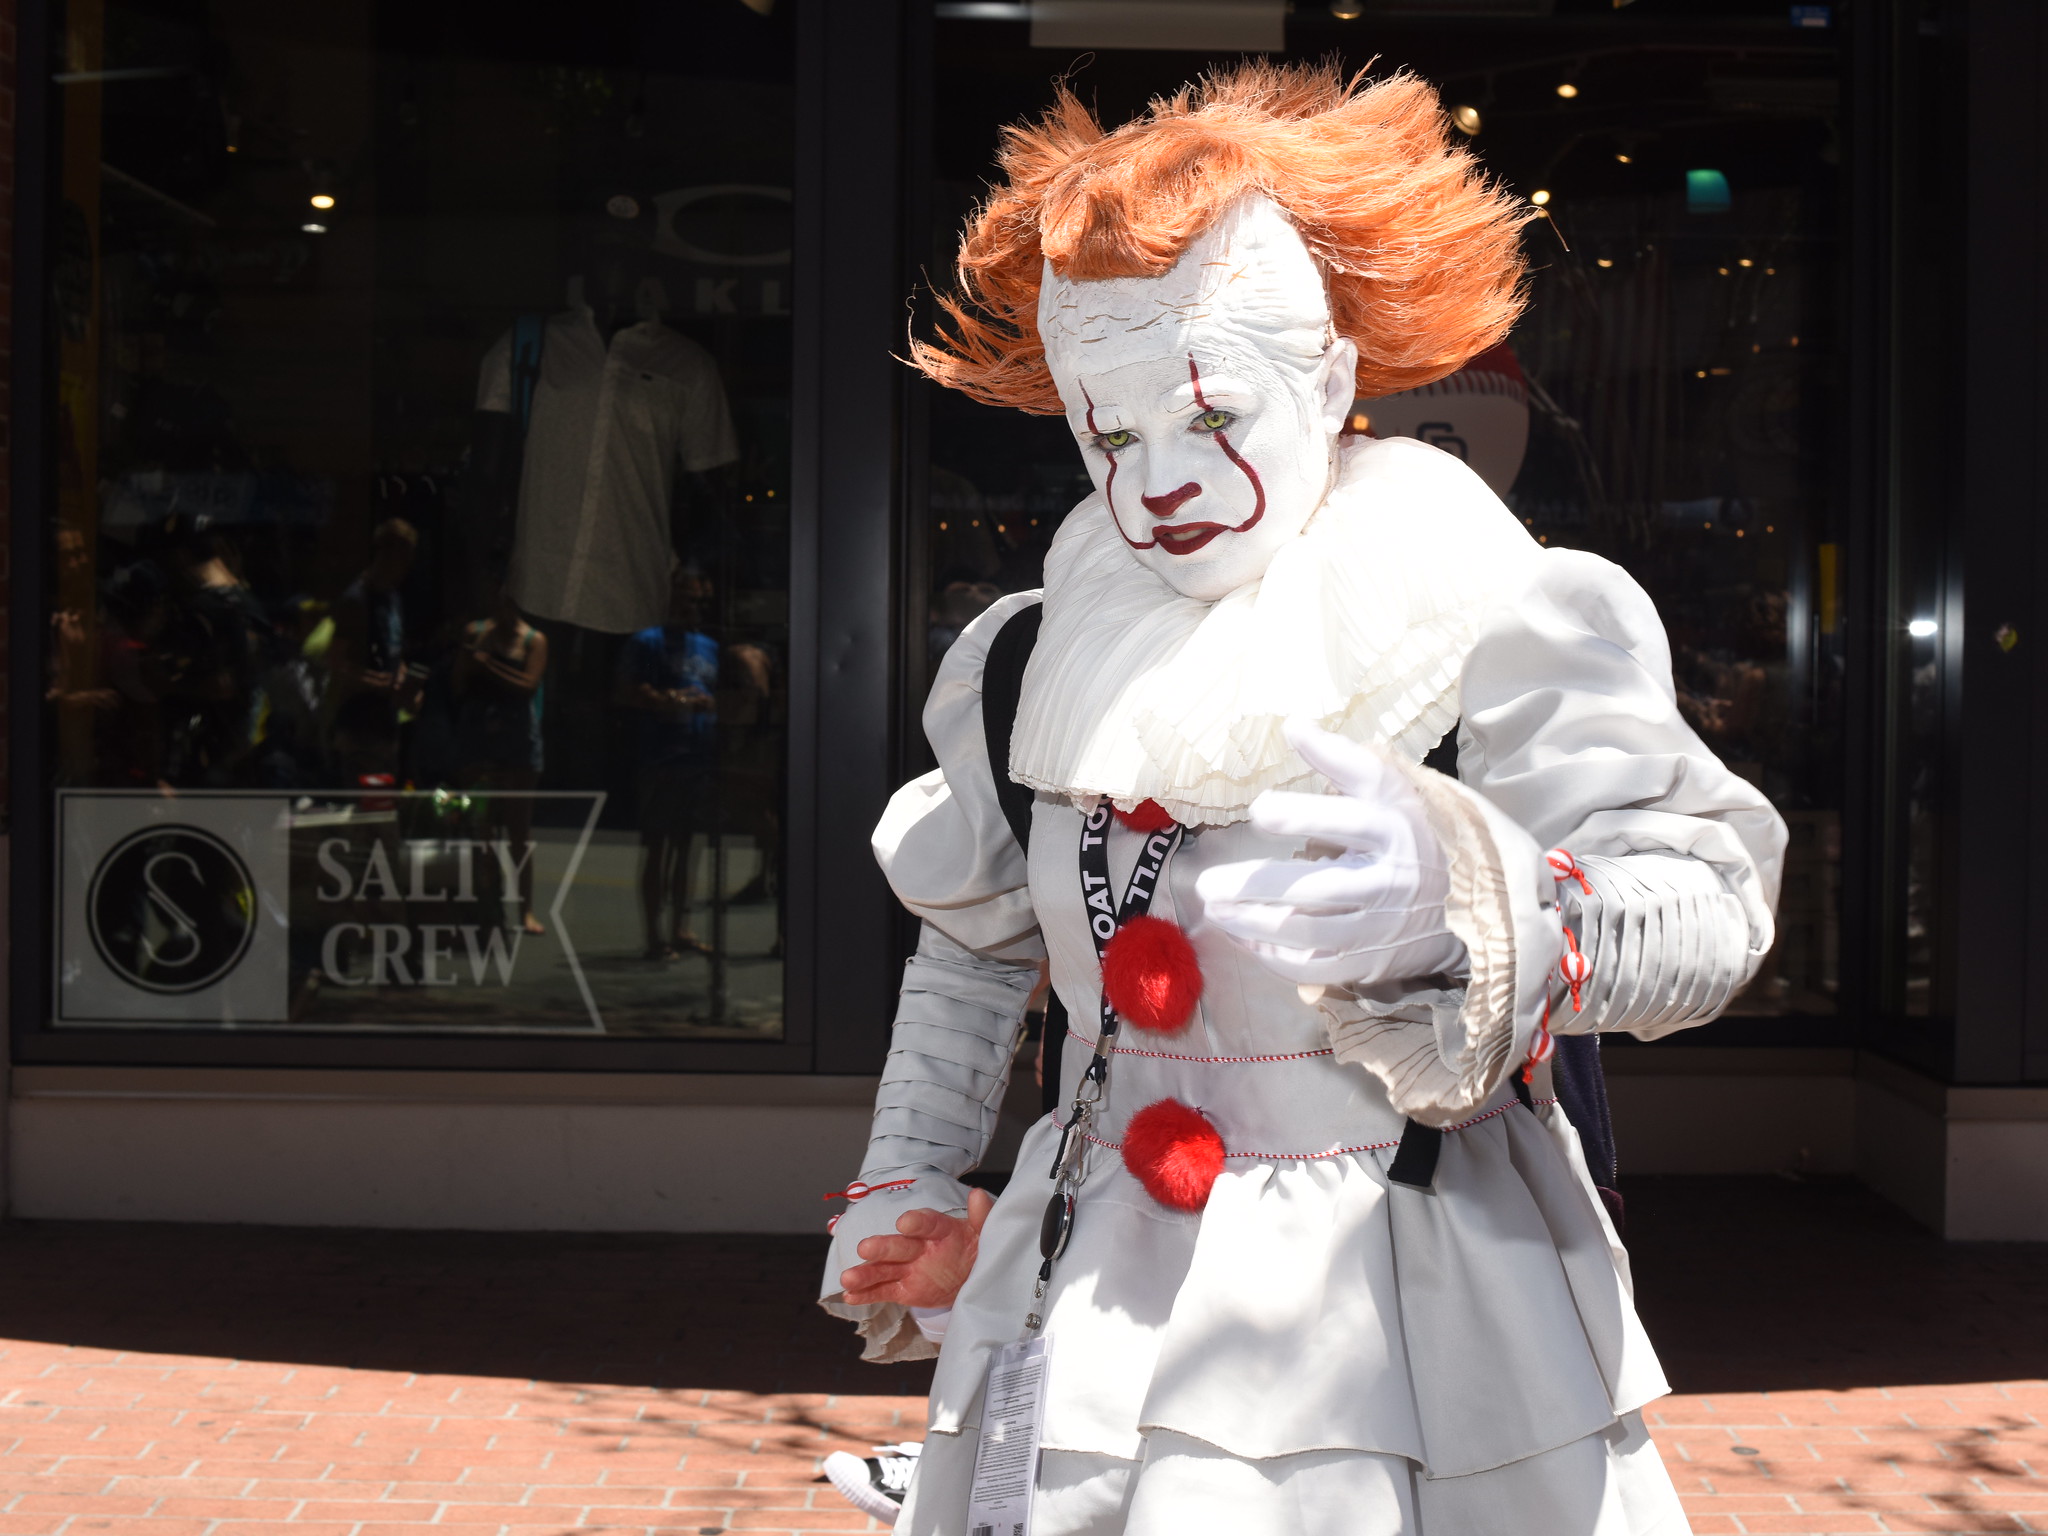 Killer clown in Pennywise costume